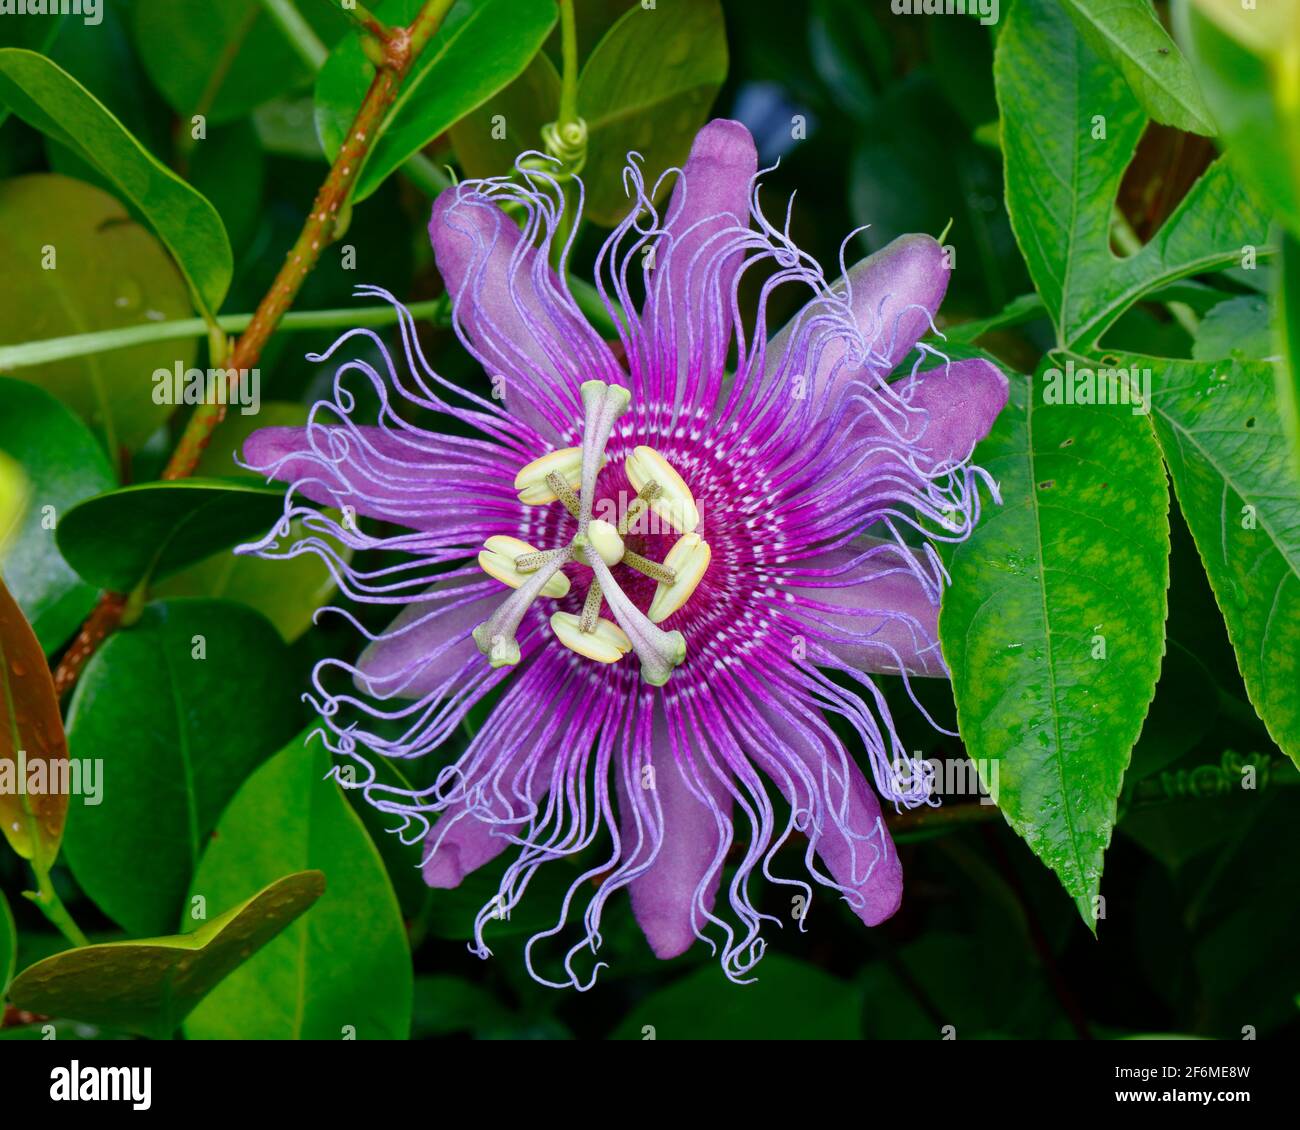 A Wild Passion Flower, Passiflora incarnata, grwing from a vine. Stock Photo